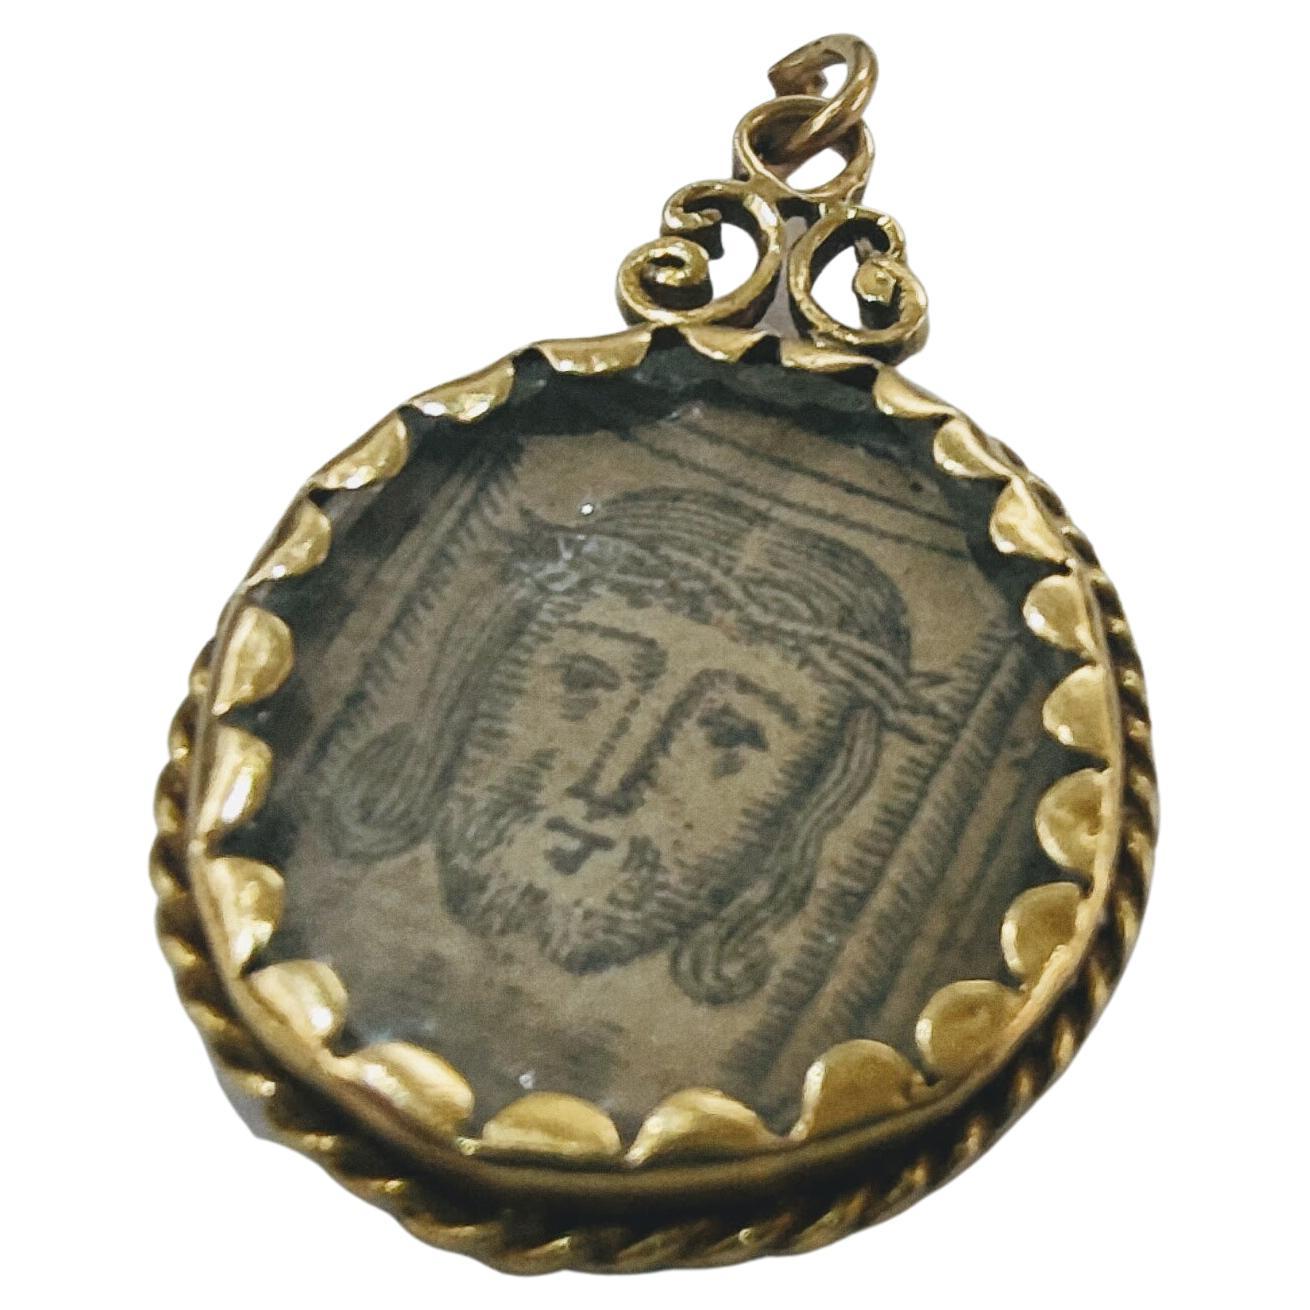 Devotional Medal Reliquary with printed image of the Virgin and Child and the Holy Face on the reverse S: XVIII yellow gold 18 kts weight 4.79 grs. 
